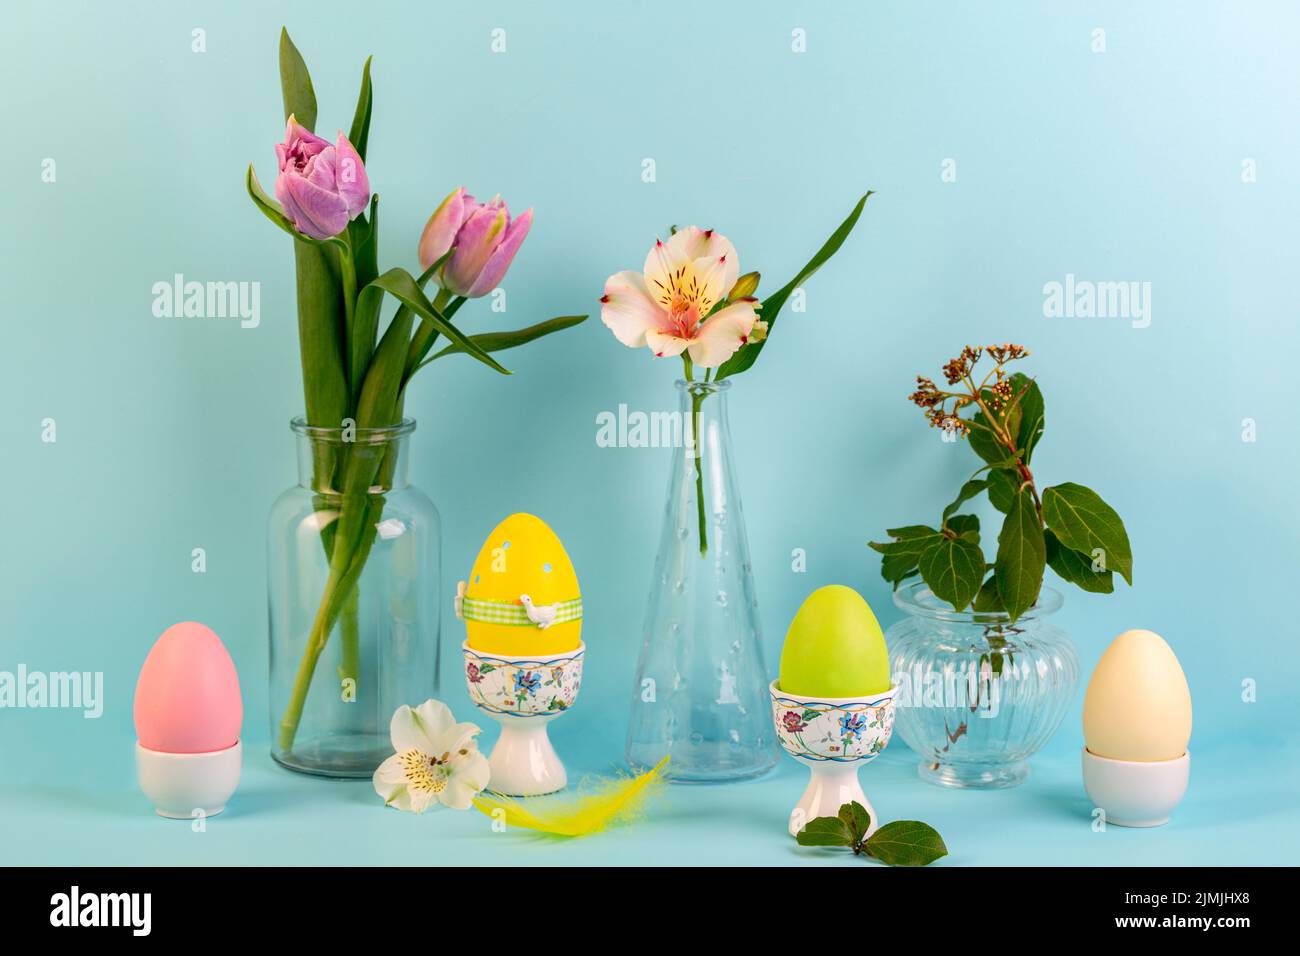 Easter composition with flowers and Easter eggs. Stock Photo